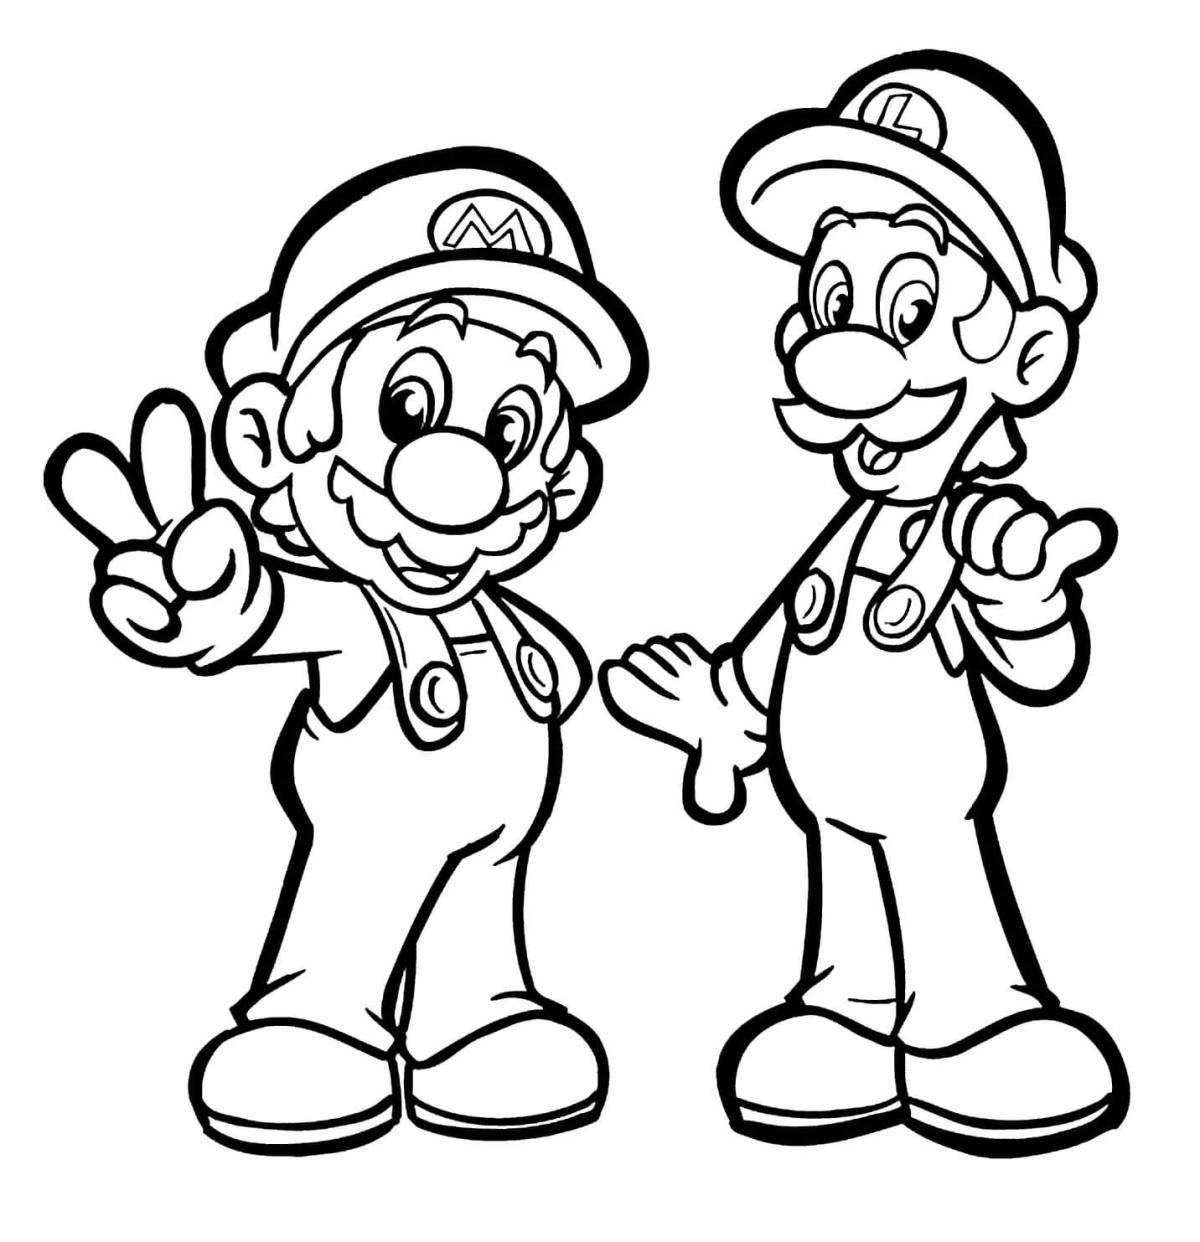 Outstanding luigi and mario coloring pages